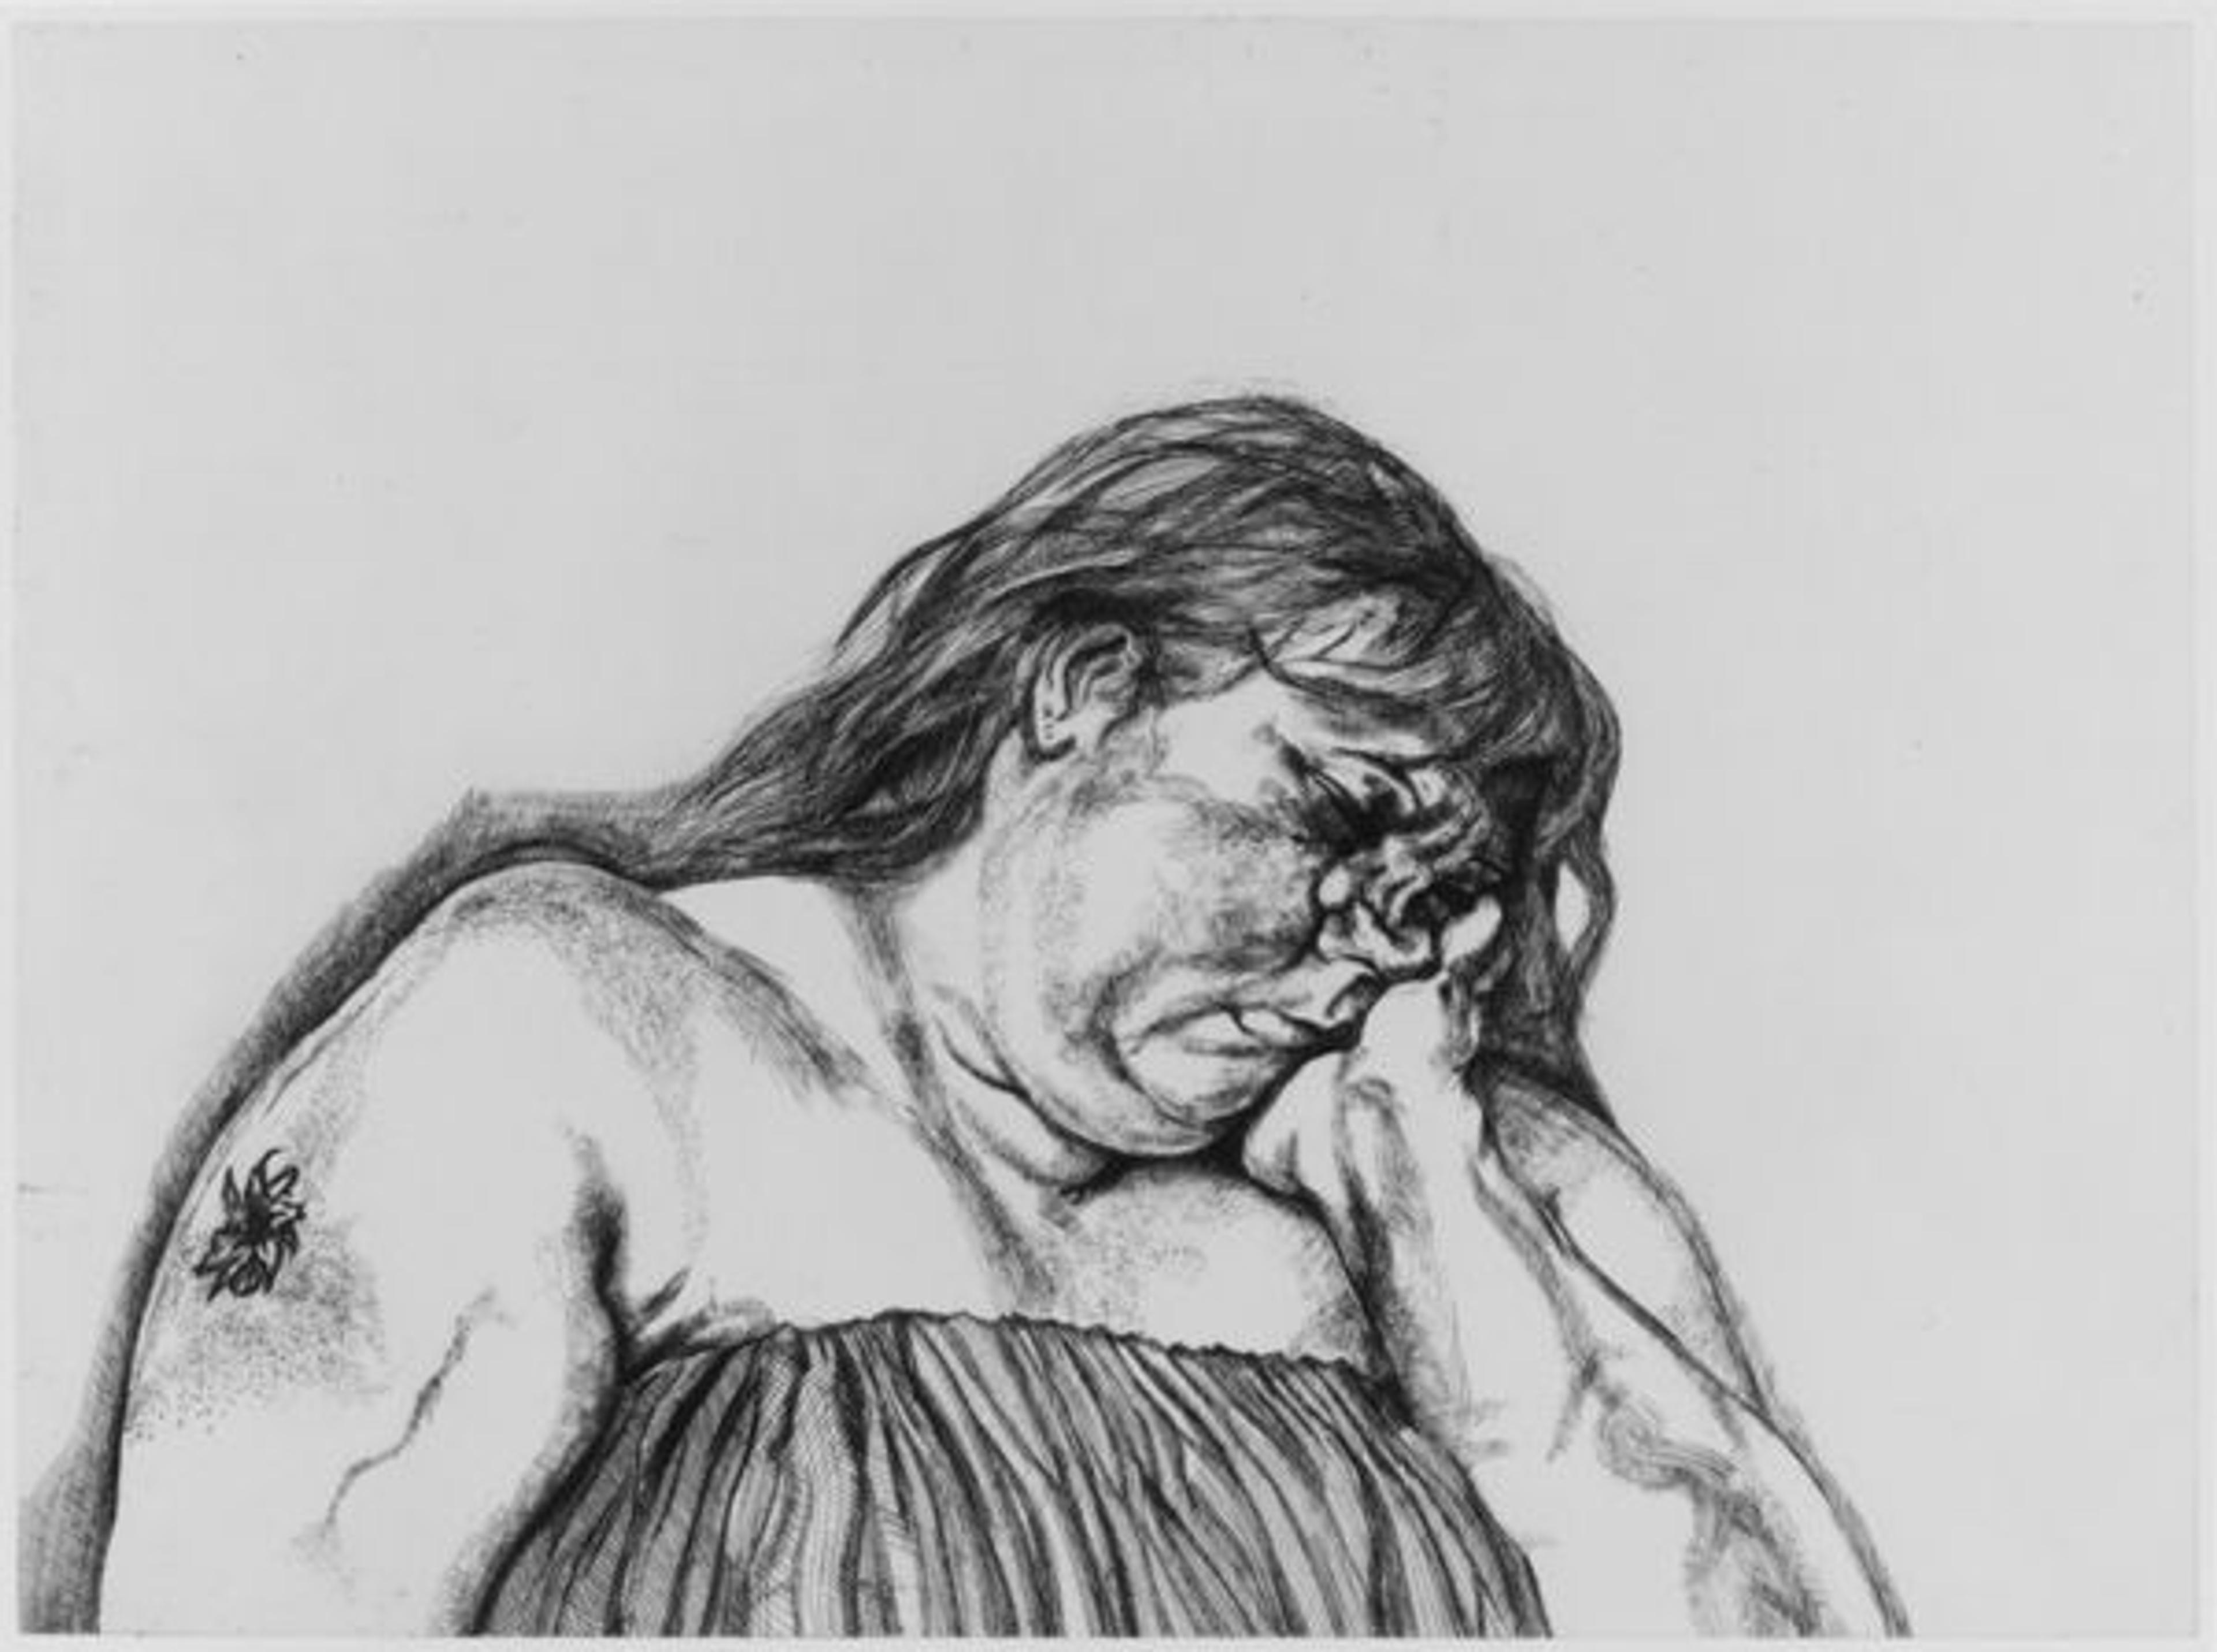 Lucian Freud, (British [born Germany], 1922–2011). Woman with an Arm Tattoo, 1996. Etching; plate: 23 1/3 x 32 1/4 in. (59.3 x 81.9 cm), sheet: 27 3/4 x 36 3/8 in (70.5 x 92.4 cm),. The Metropolitan Museum of Art, New York, Reba and Dave Williams Gift, 1997 (1997.94)